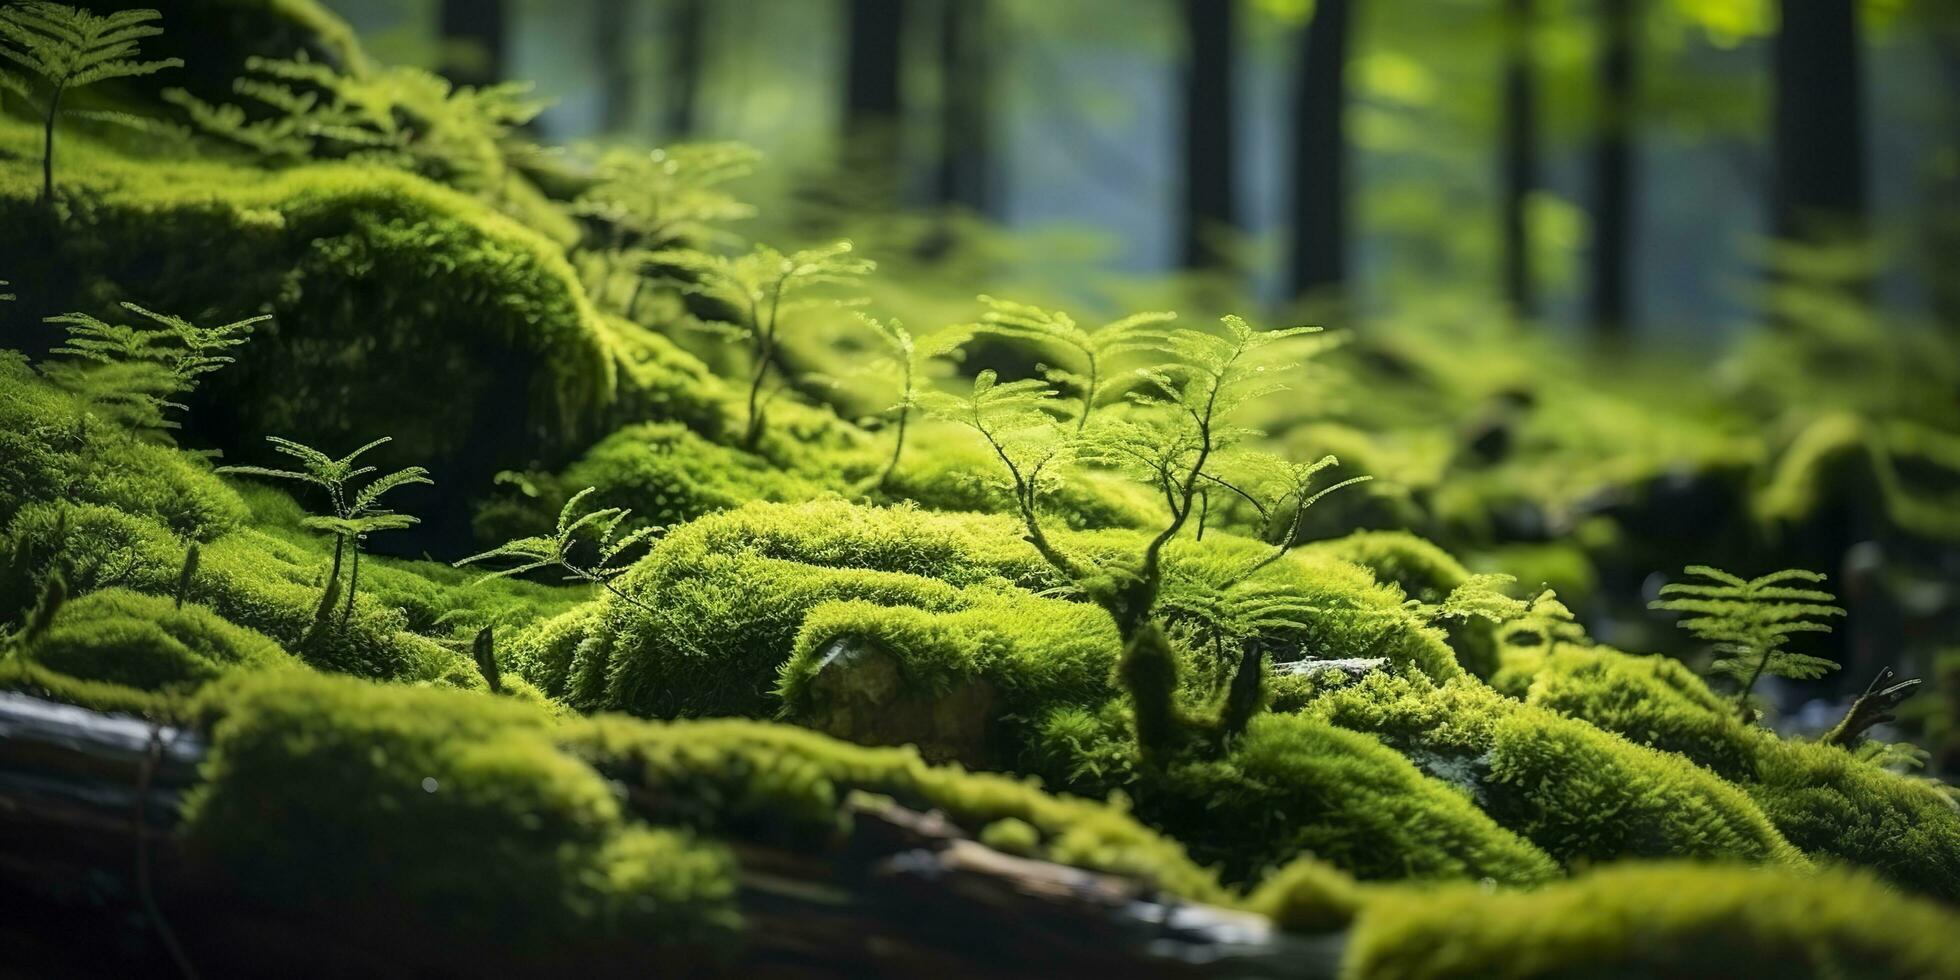 A background of green moss, Stock image